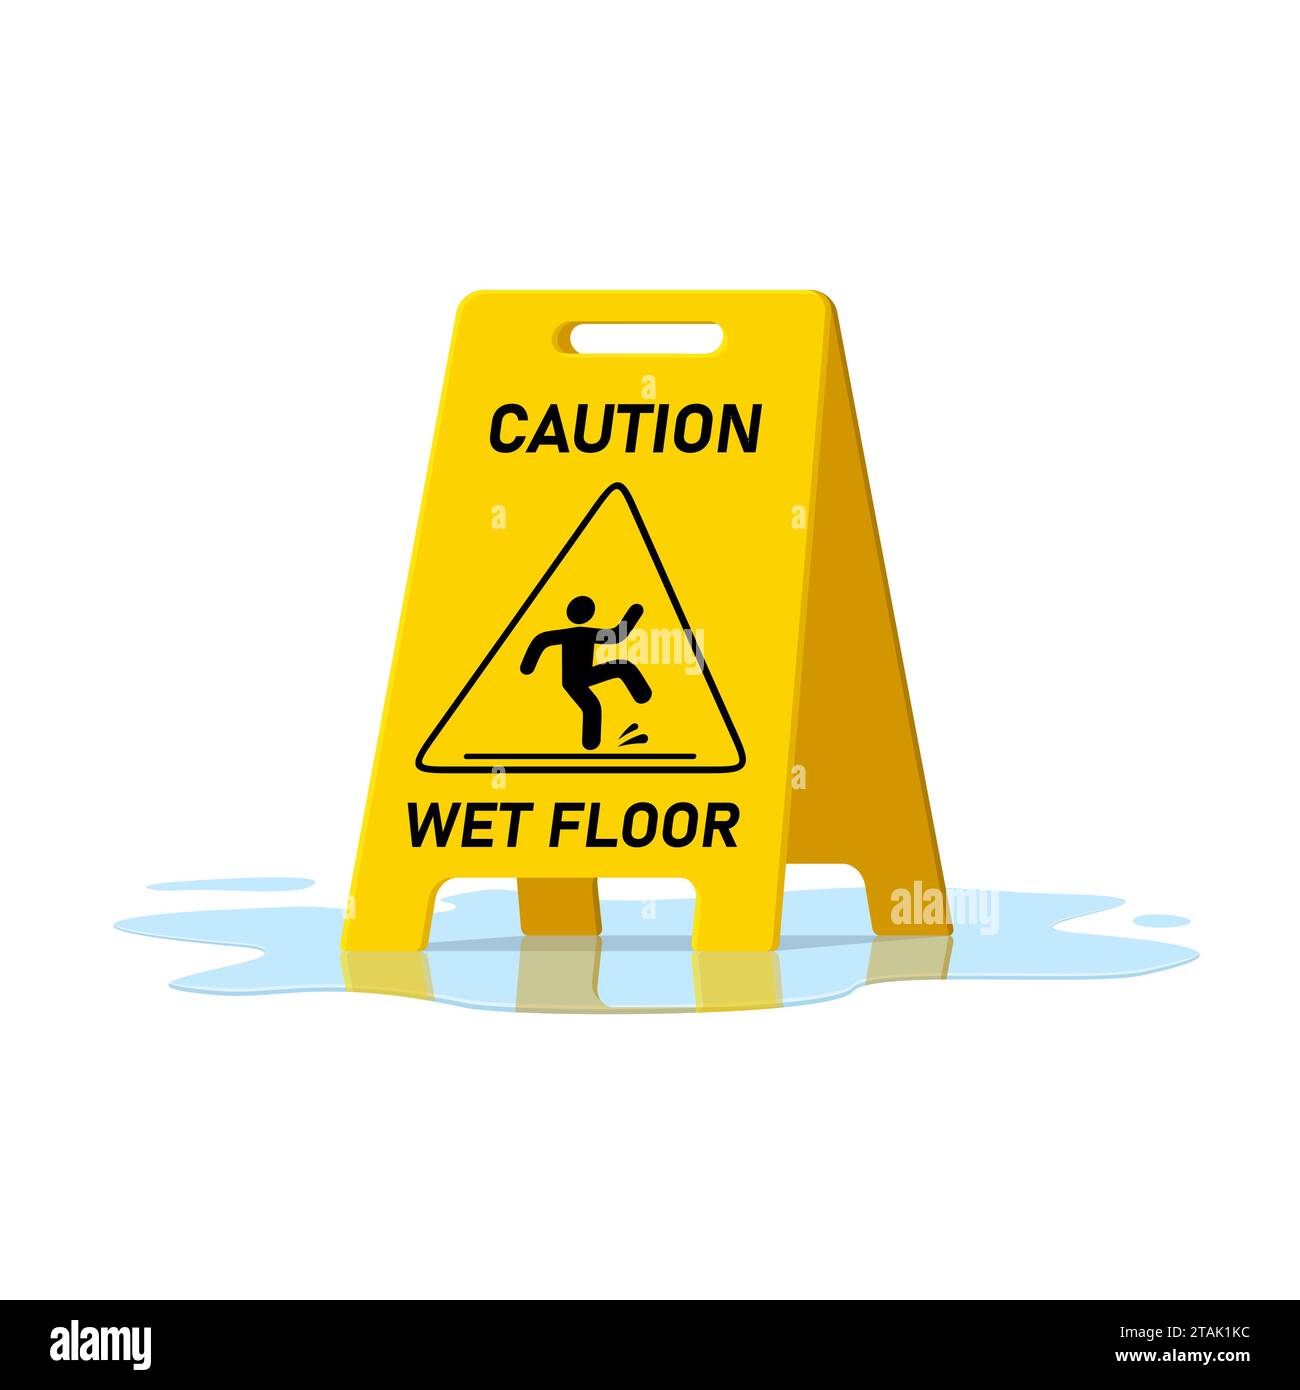 Wet floor caution sign and water puddle isolated on white background, Public warning yellow symbol clipart. Slippery surface beware plastic board Stock Vector